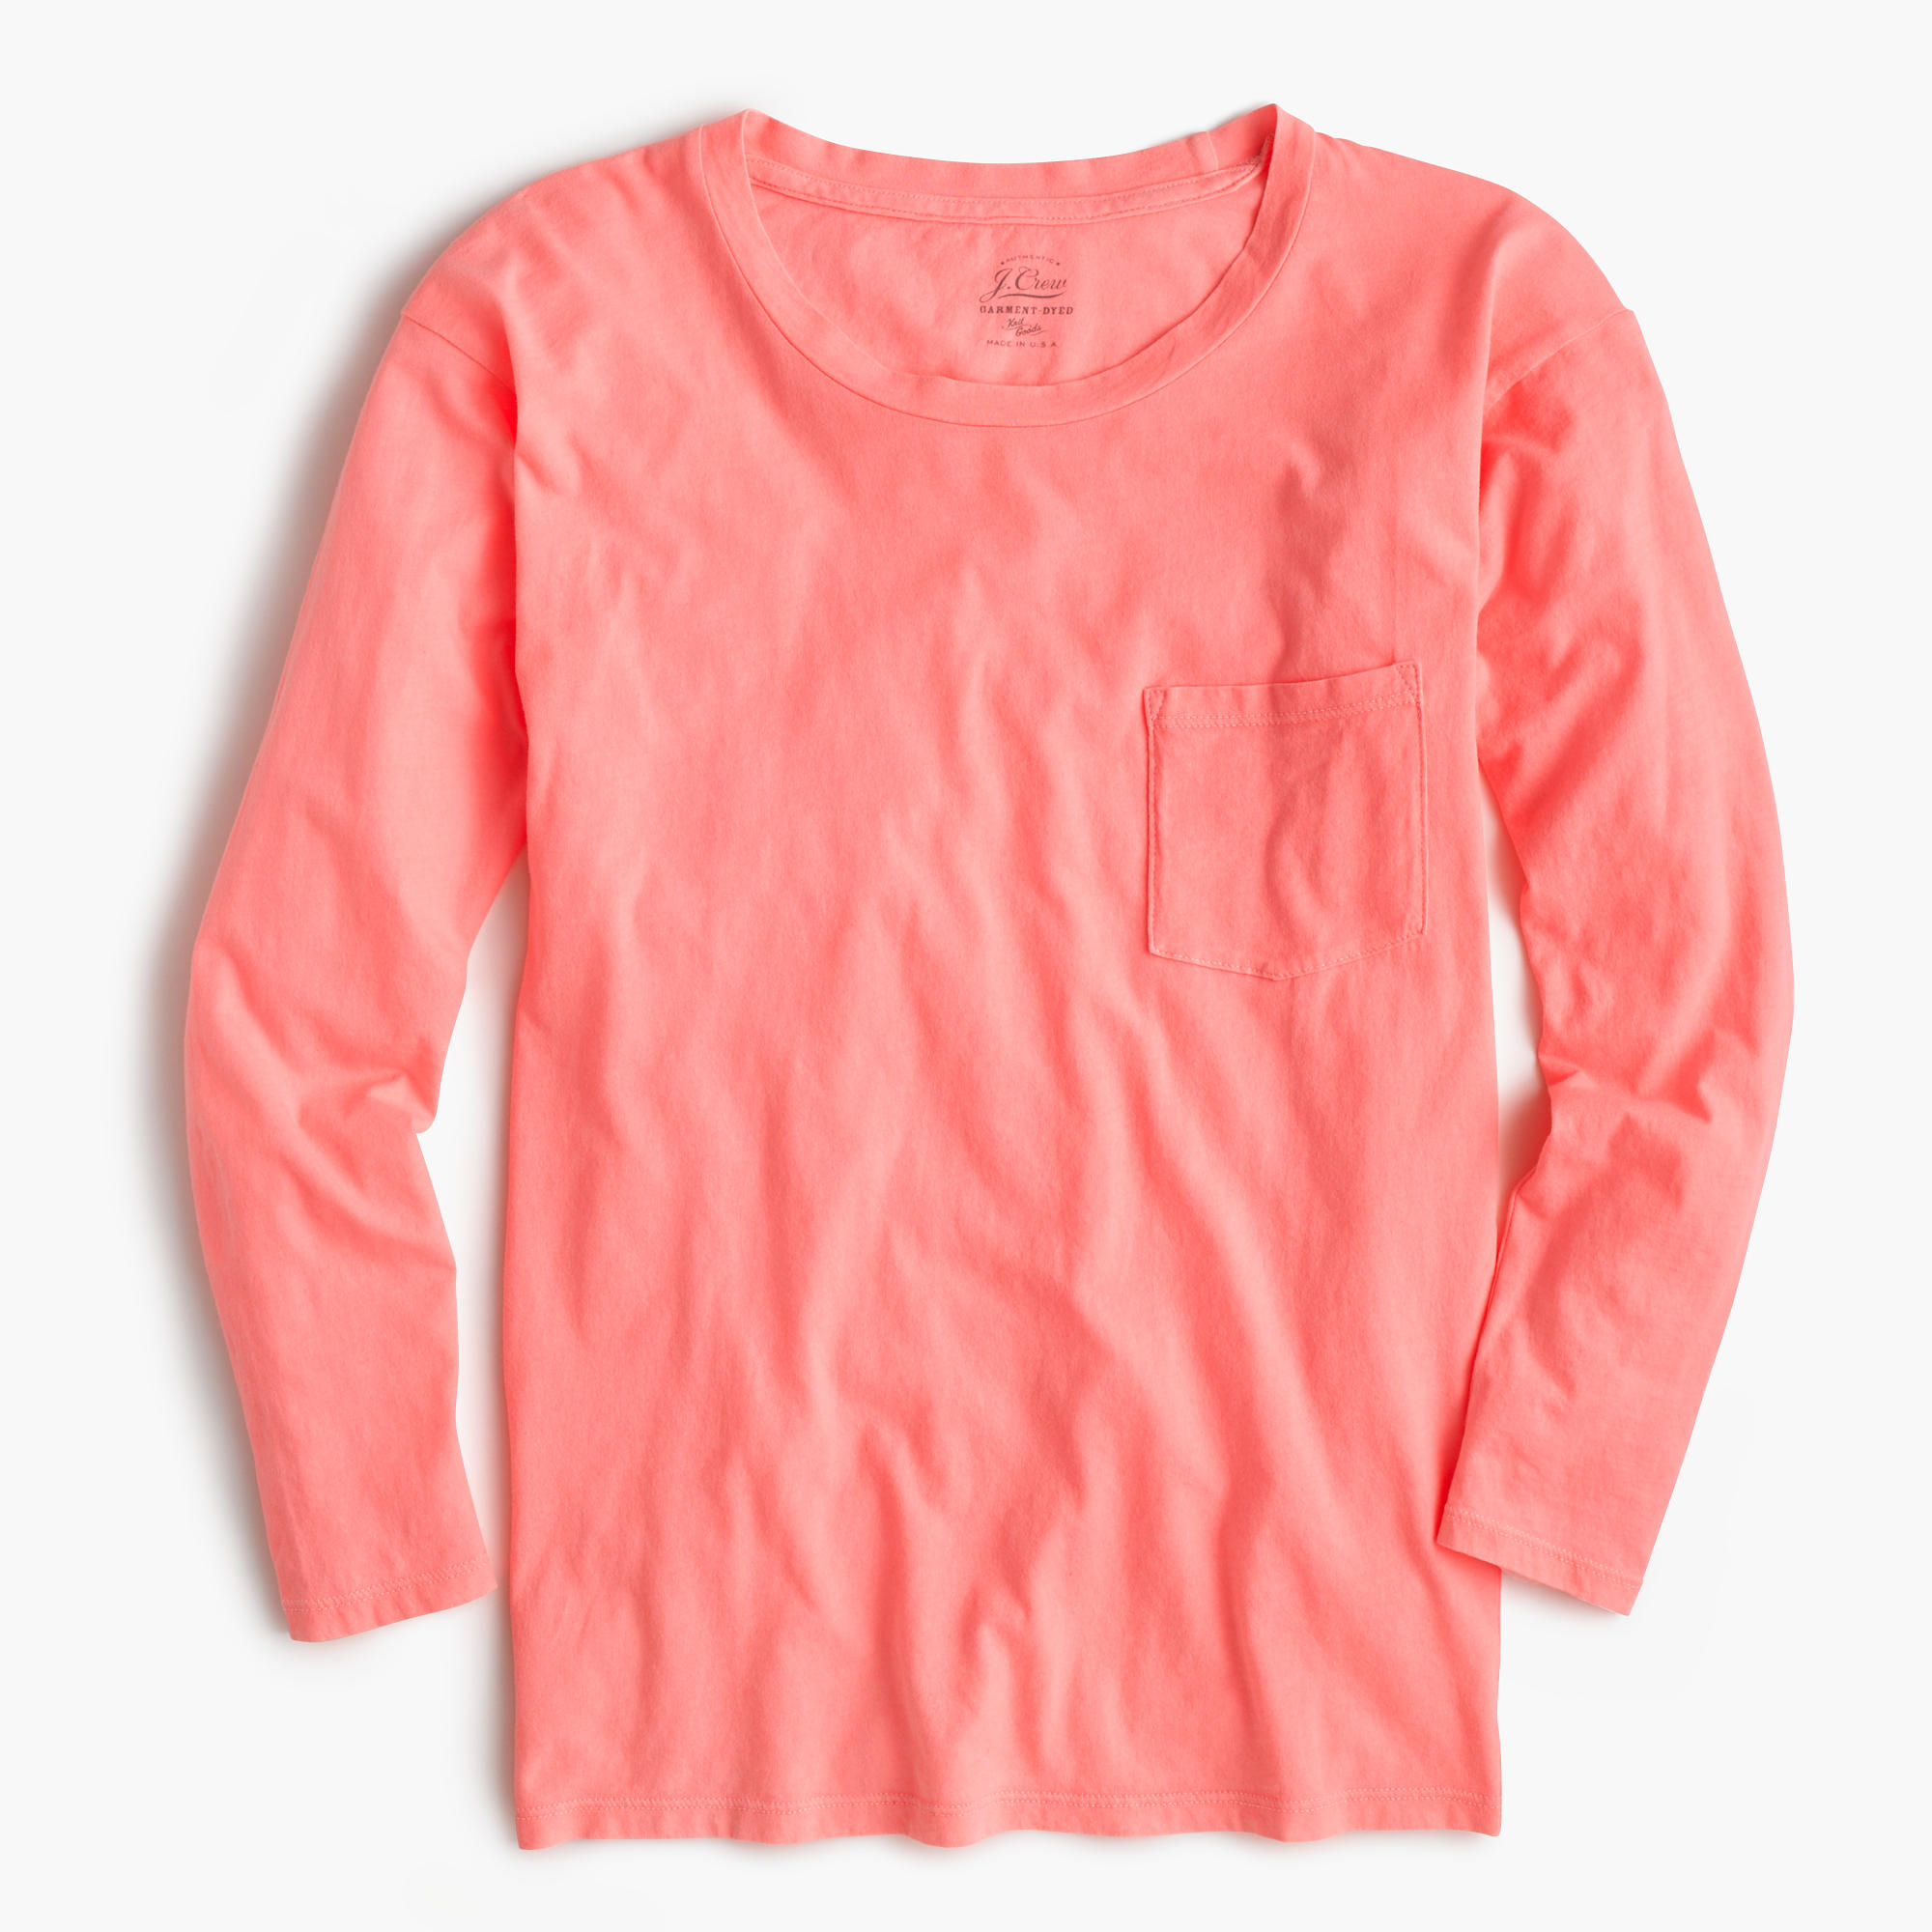 J.crew Long-sleeve Garment-dyed Pocket T-shirt in Pink | Lyst